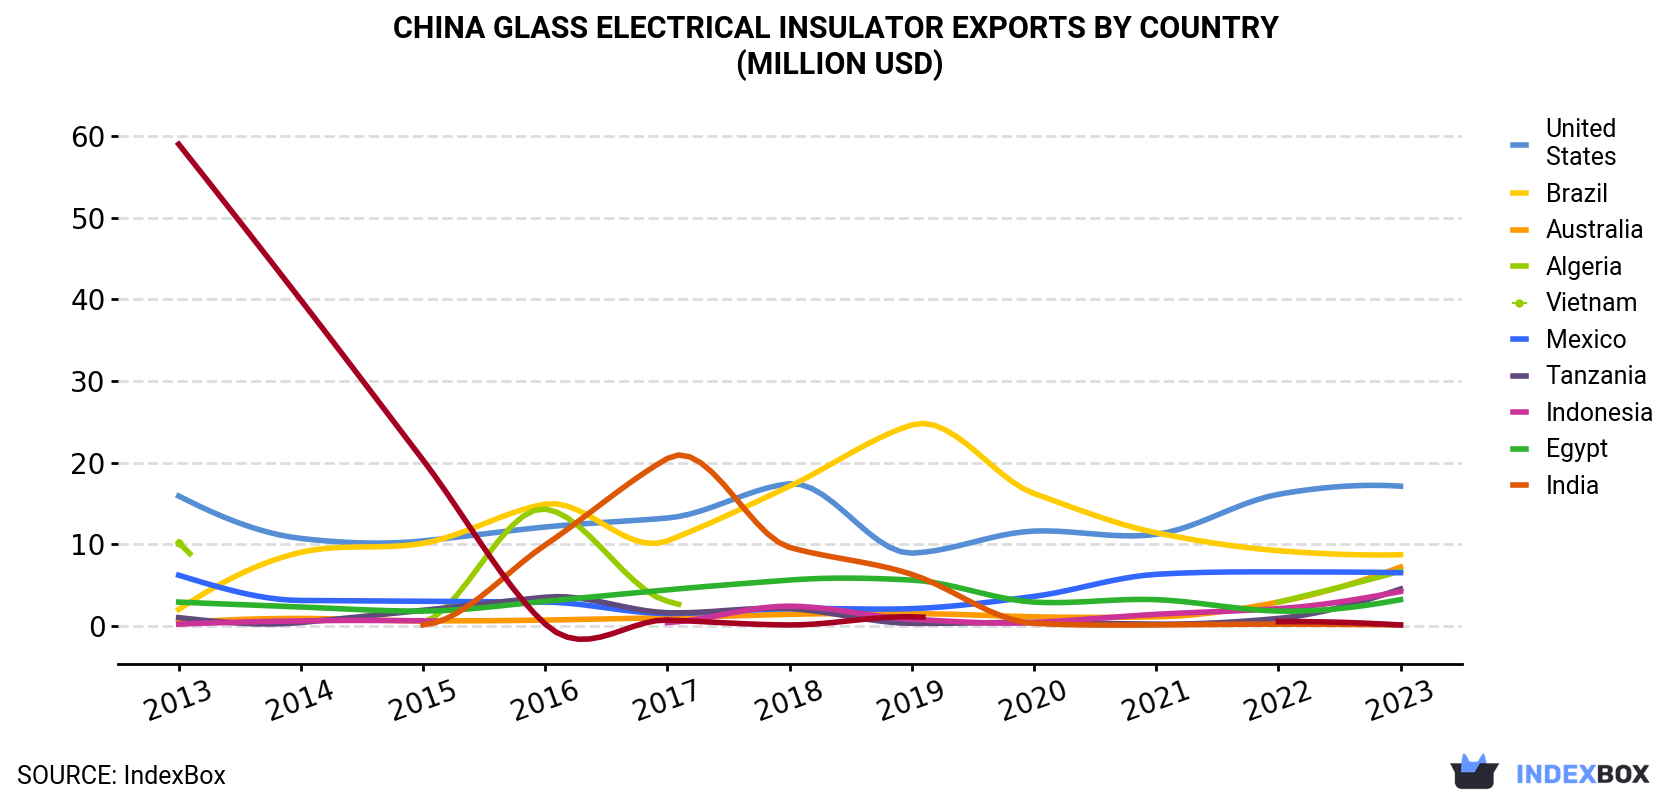 China Glass Electrical Insulator Exports By Country (Million USD)